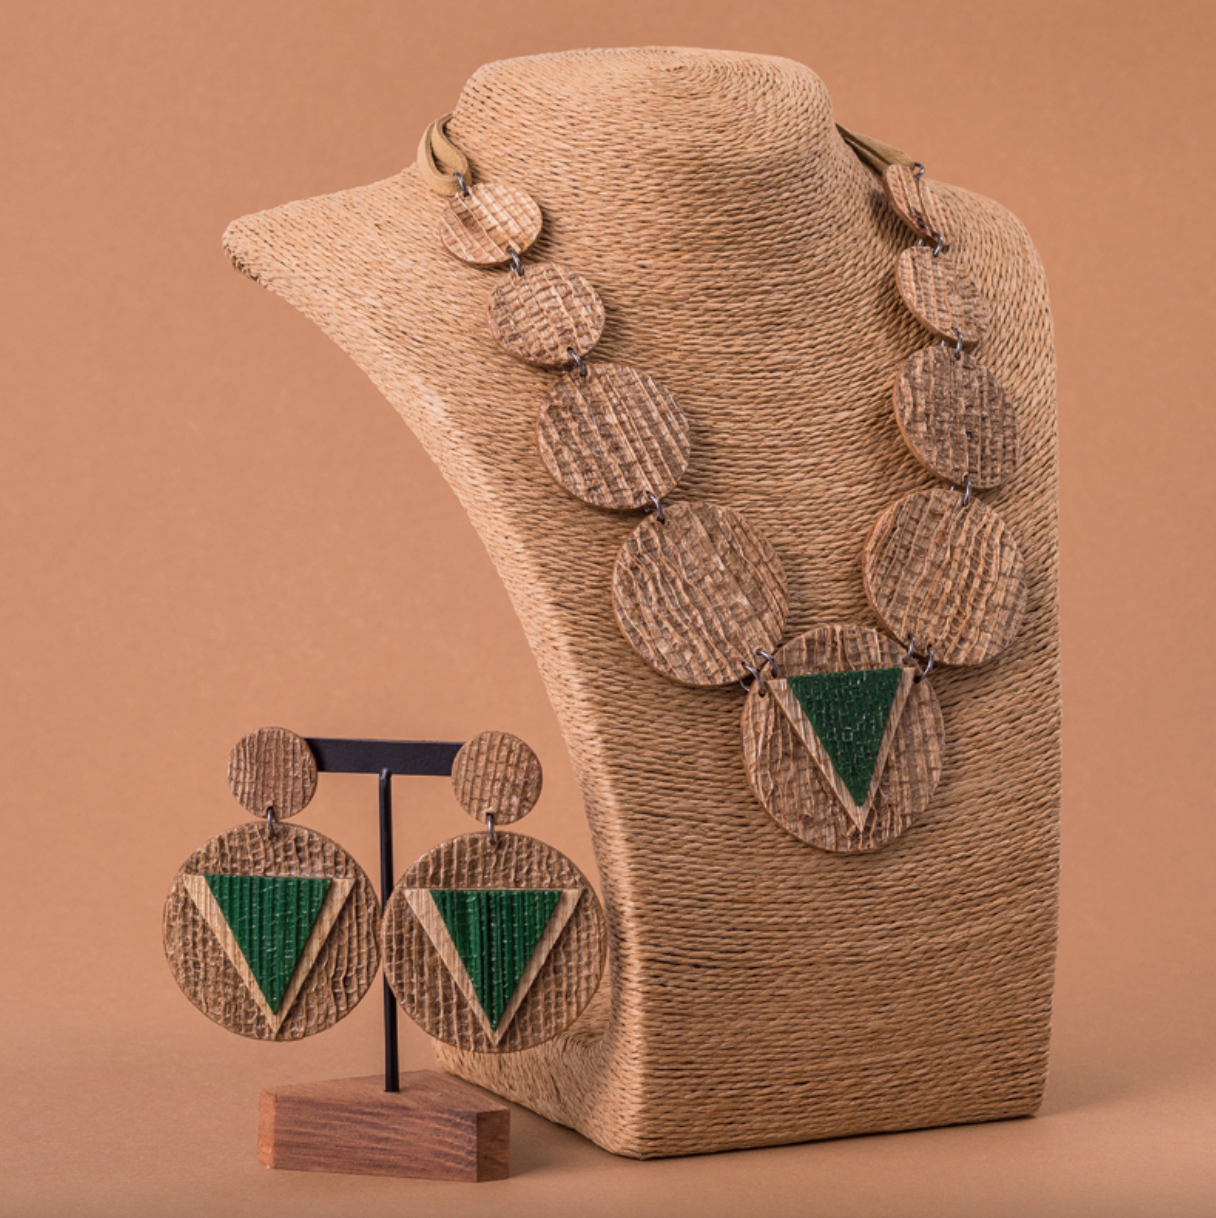 Equilibrium Dark Green Earrings: Stylish and Sustainable Statement Earrings Made from Recycled Materials